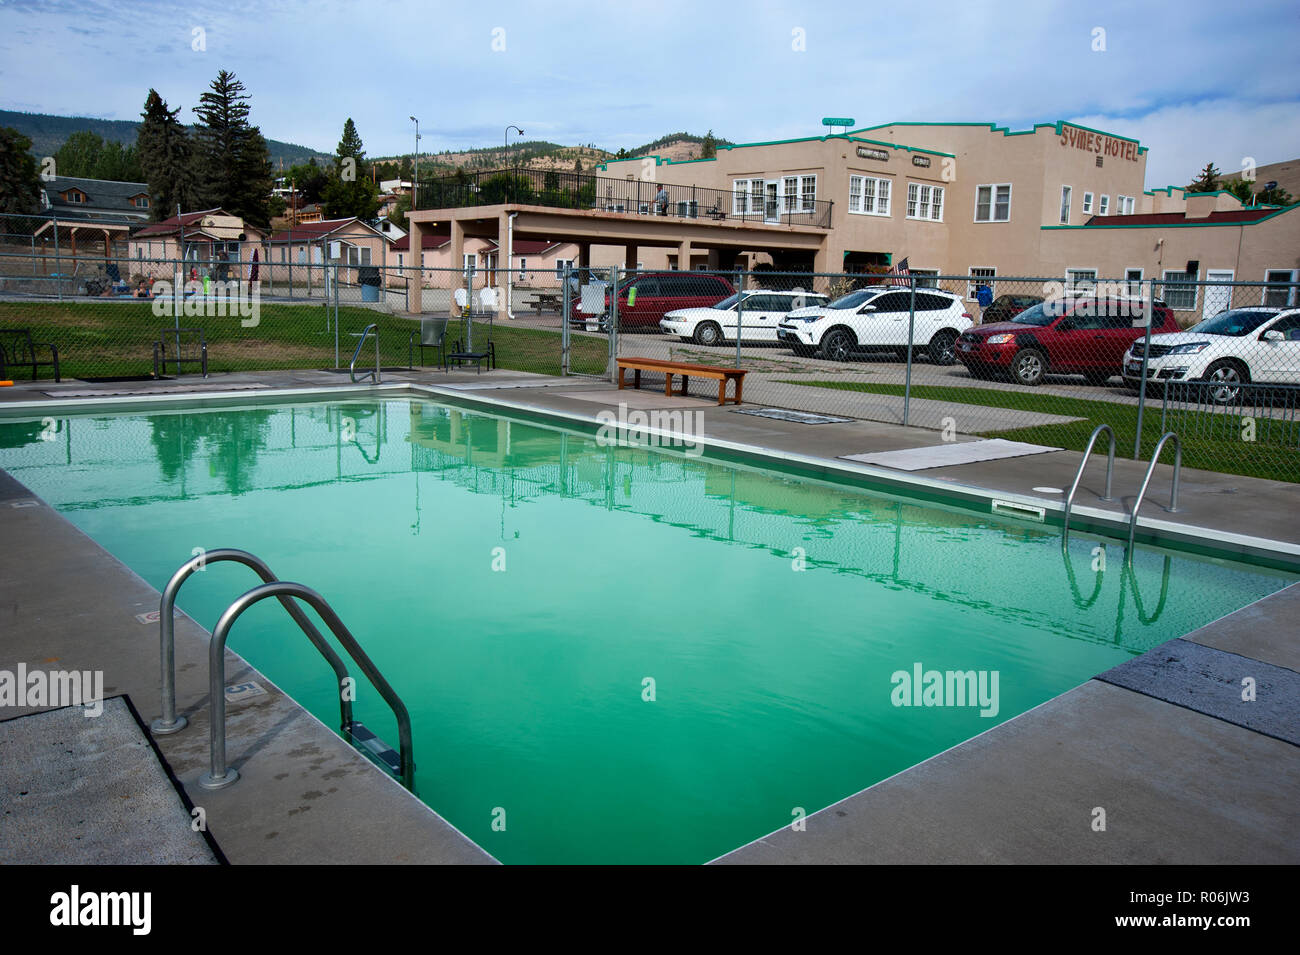 Mineral Hot Springs Pool an der Symes Hotel in Montana, USA Stockfoto